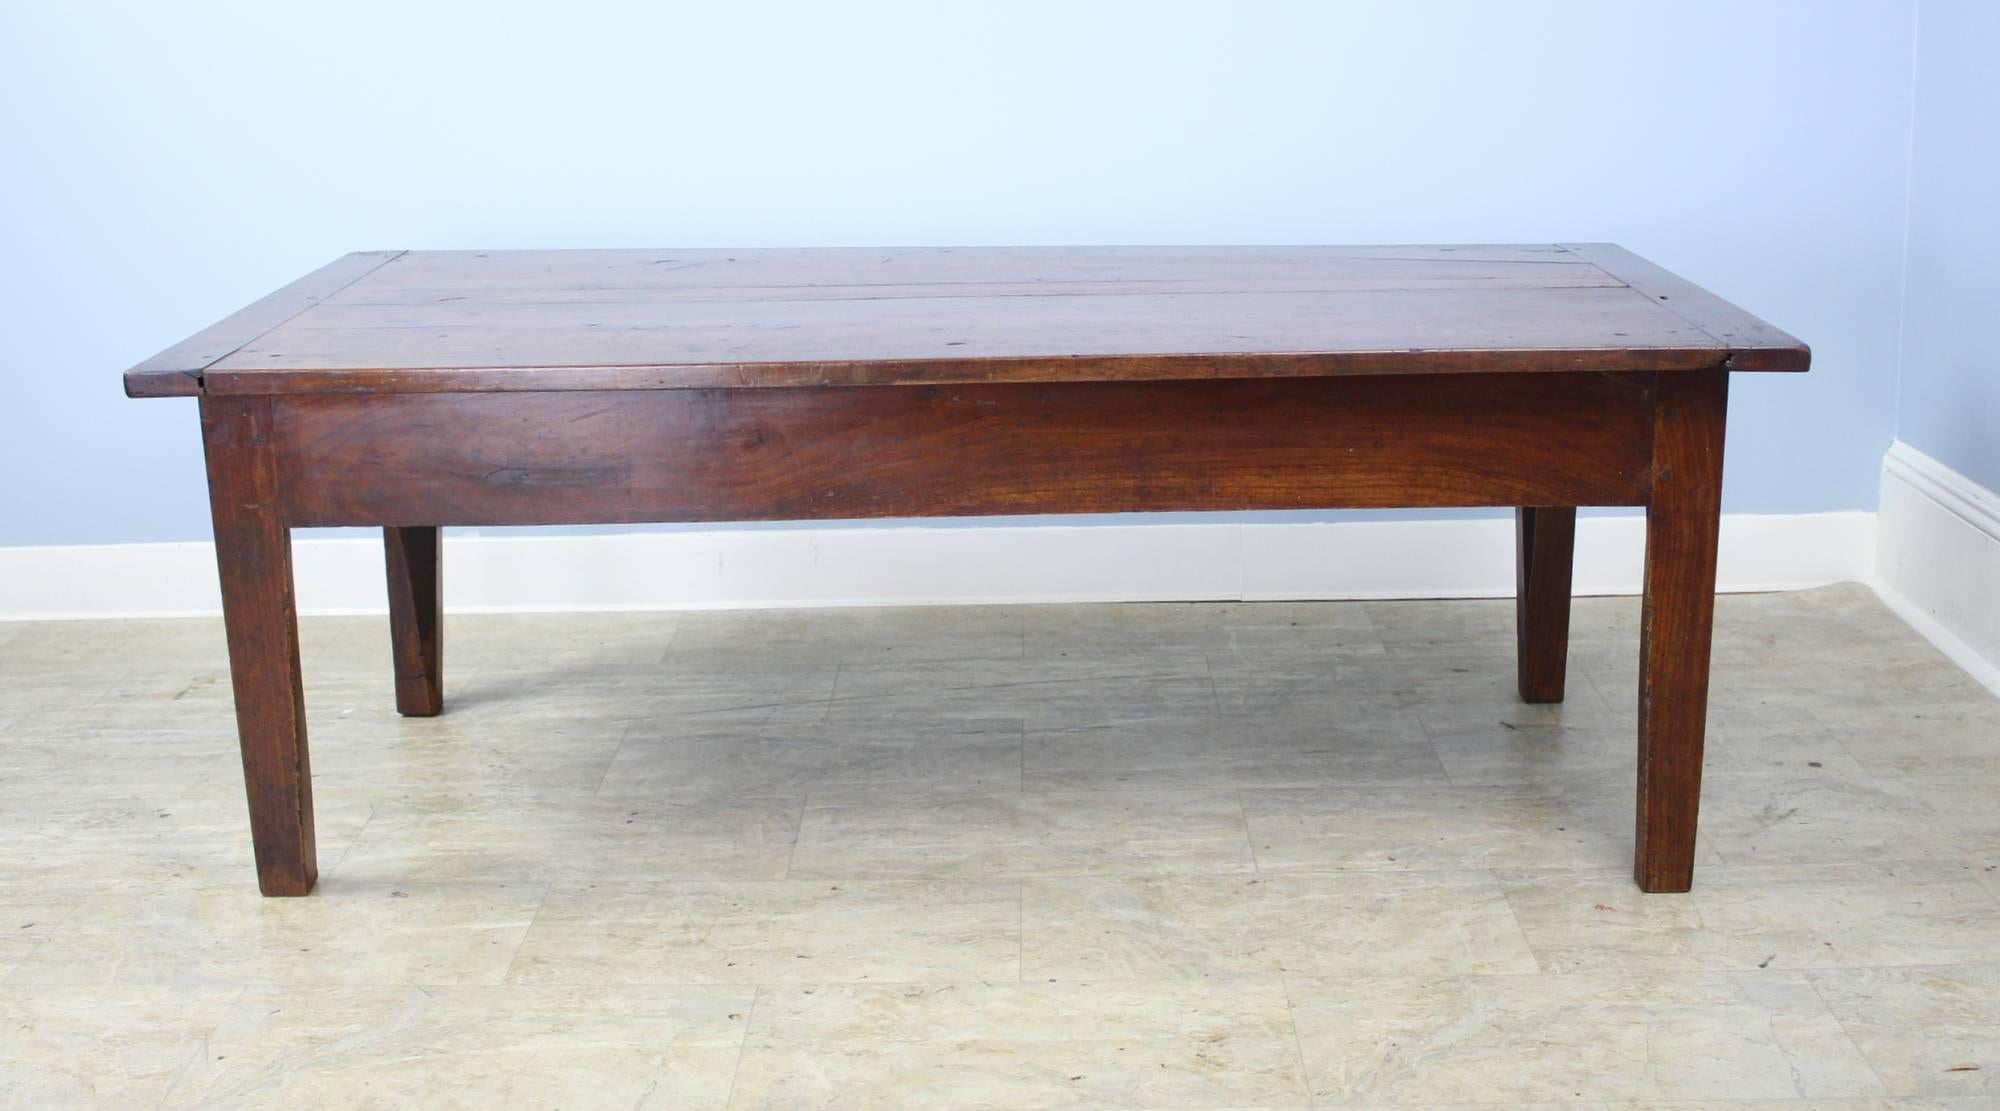 A chunky cherry coffee table with wonderful color and grain. The top has some interesting distress and classic breadboard ends. Solid legs, pegged at the apron, complete the look. Identical drawers at either end provide some storage.